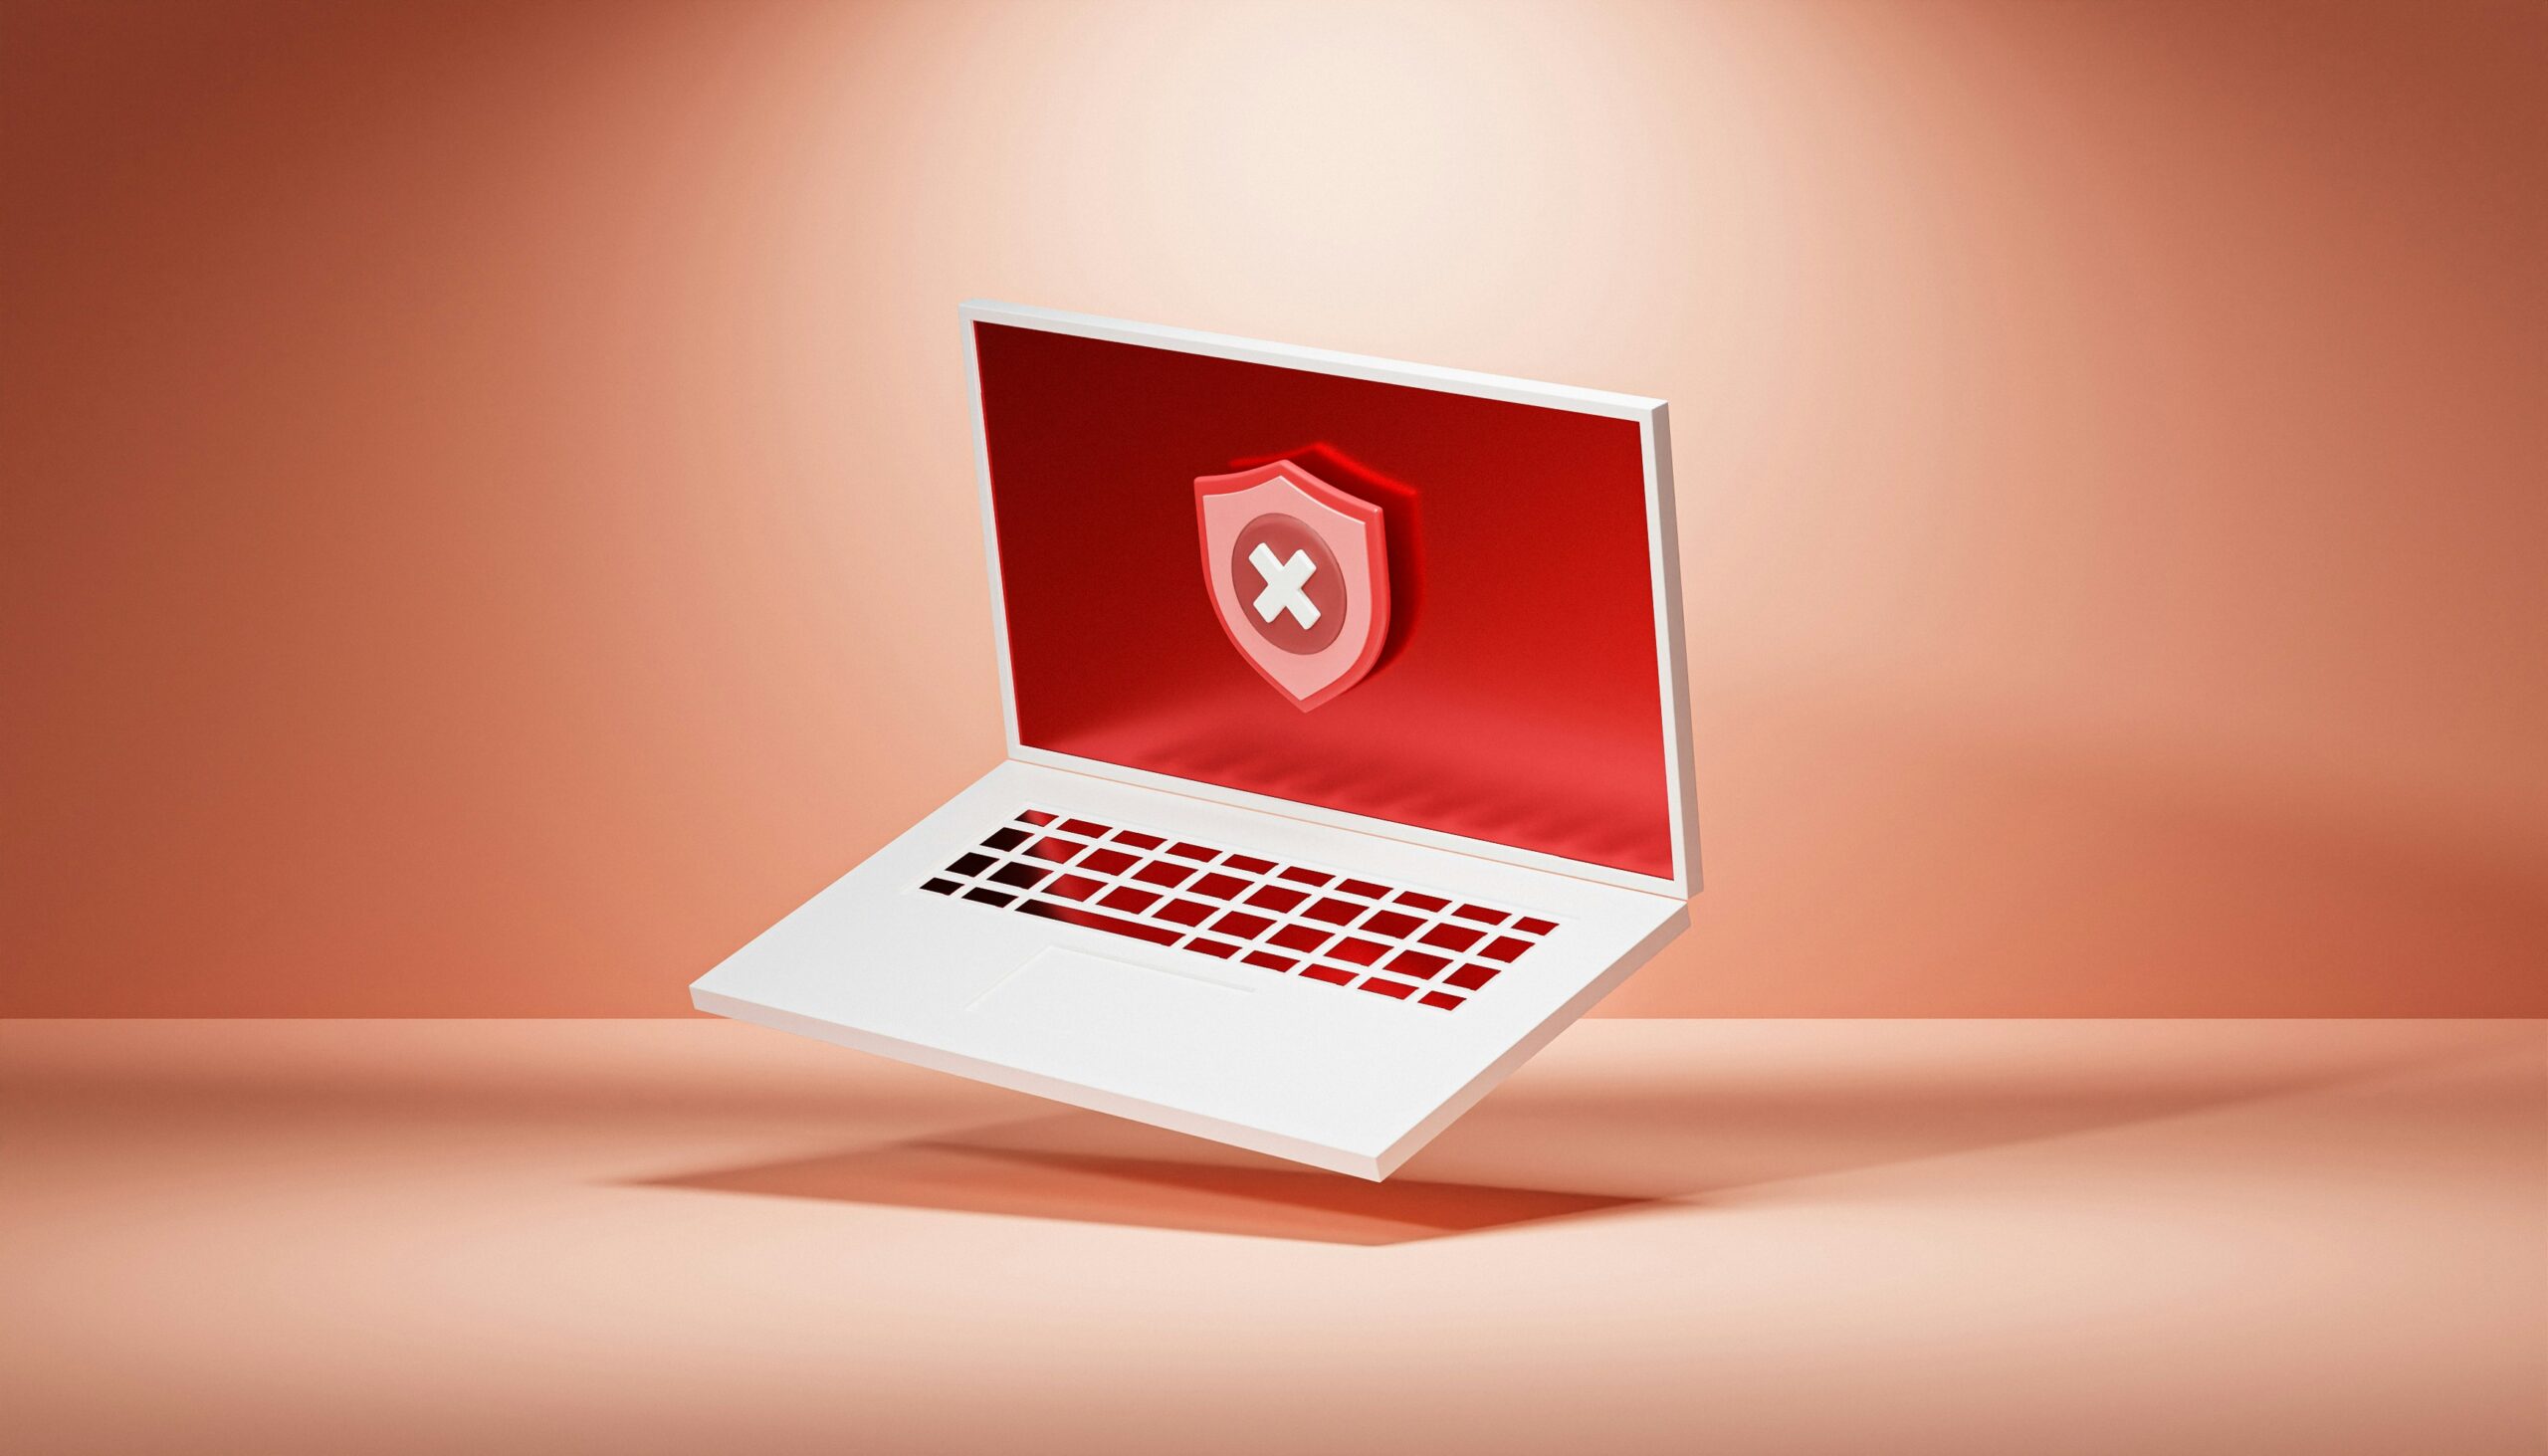 A laptop with a red shield on it with an X, symbolizing a data breach due to lack of cyber security strategy.